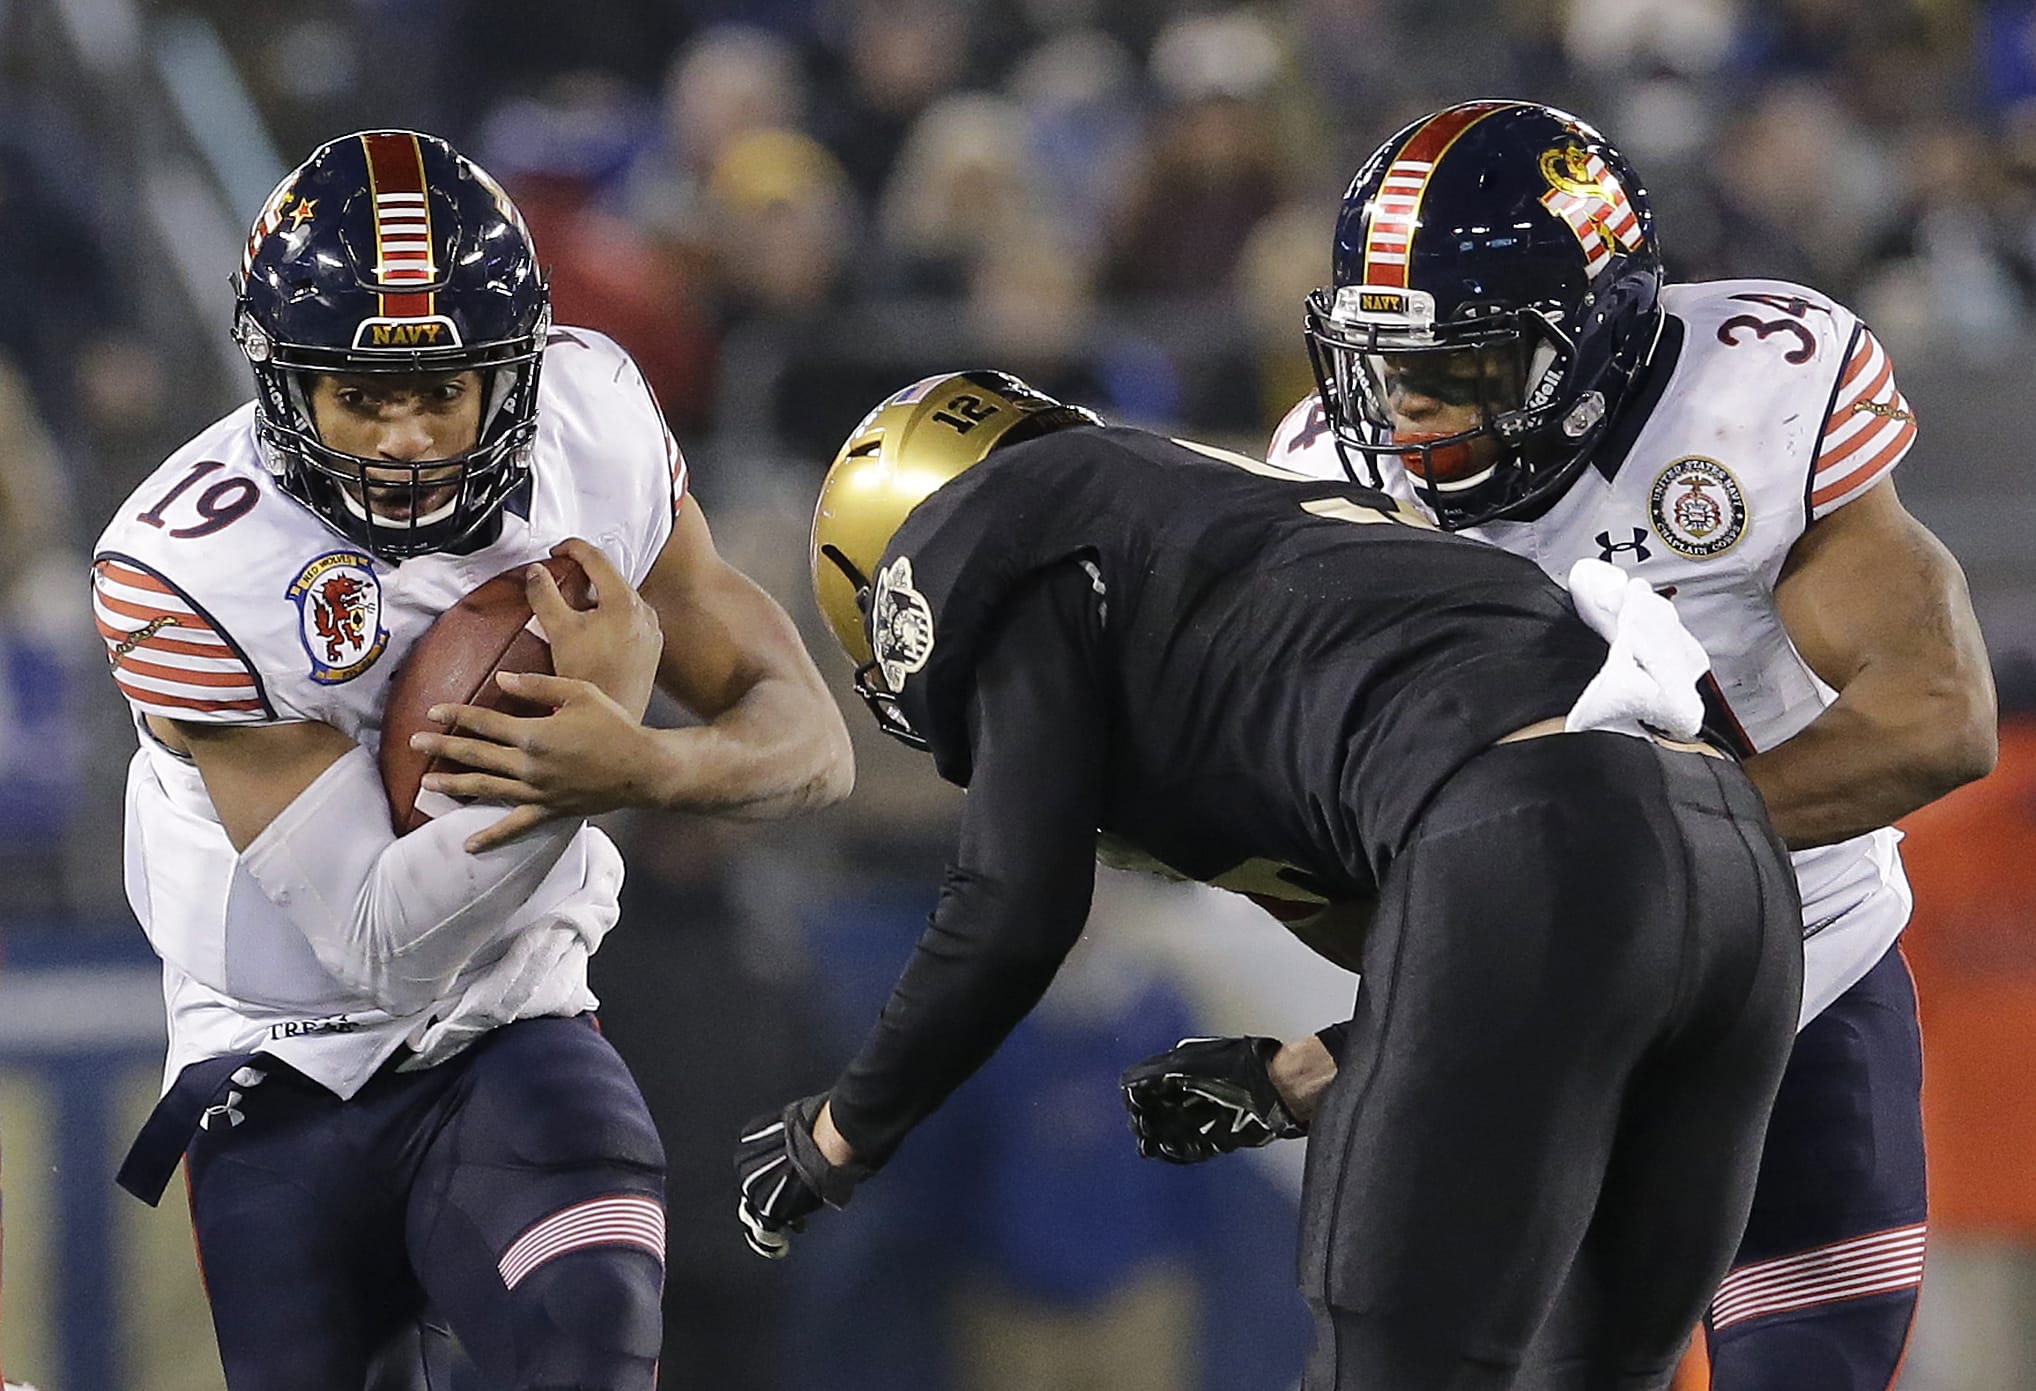 Navy quarterback Keenan Reynolds, left, dodges Army defensive back Hayden Pierce as he rushes the ball past teammate Noah Copeland in the second half Saturday, Dec. 13, 2014, in Baltimore. Navy won 17-10.